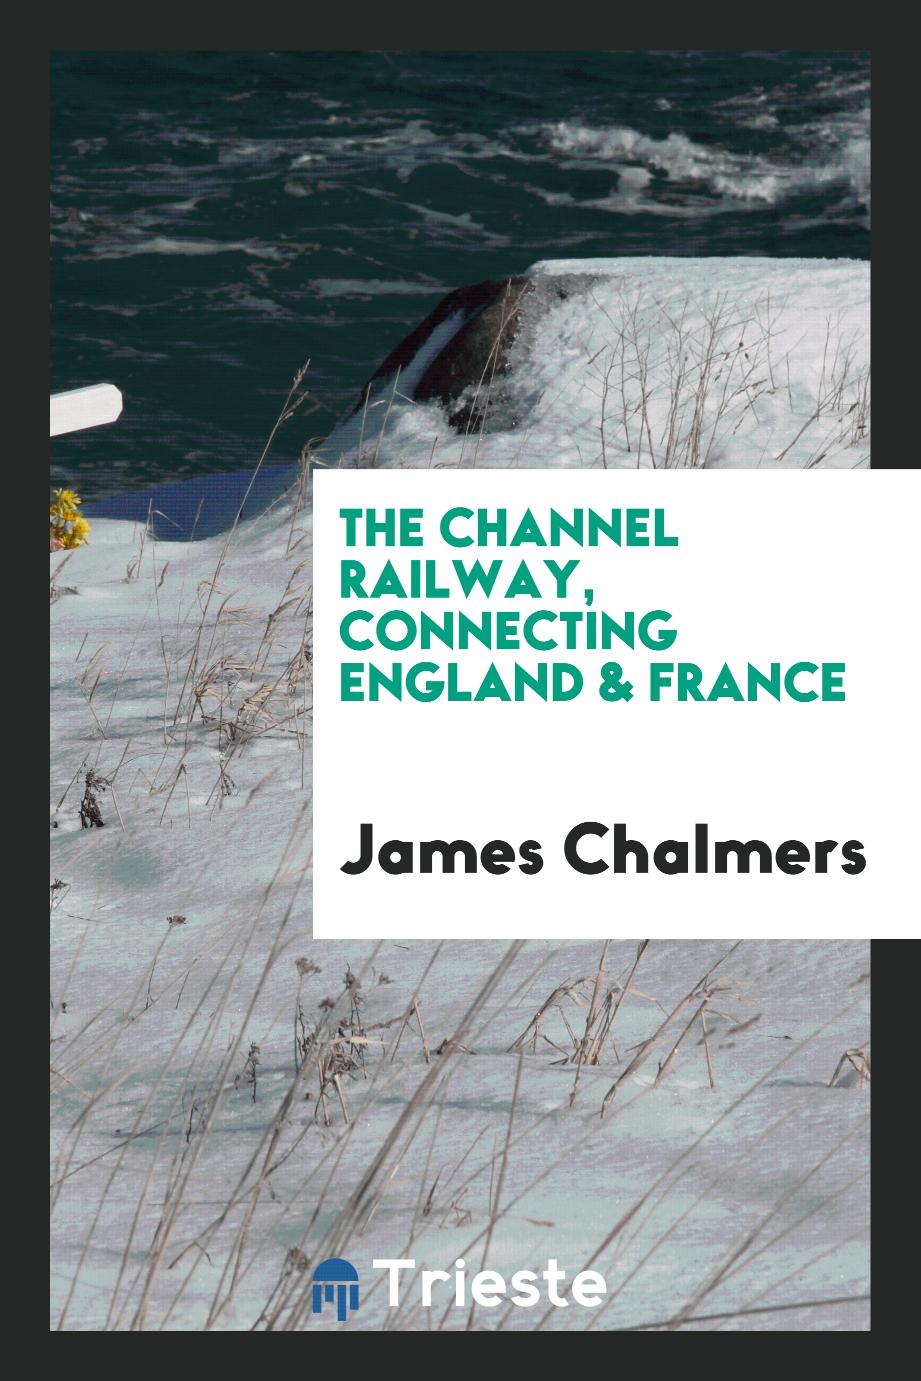 The Channel railway, connecting England & France